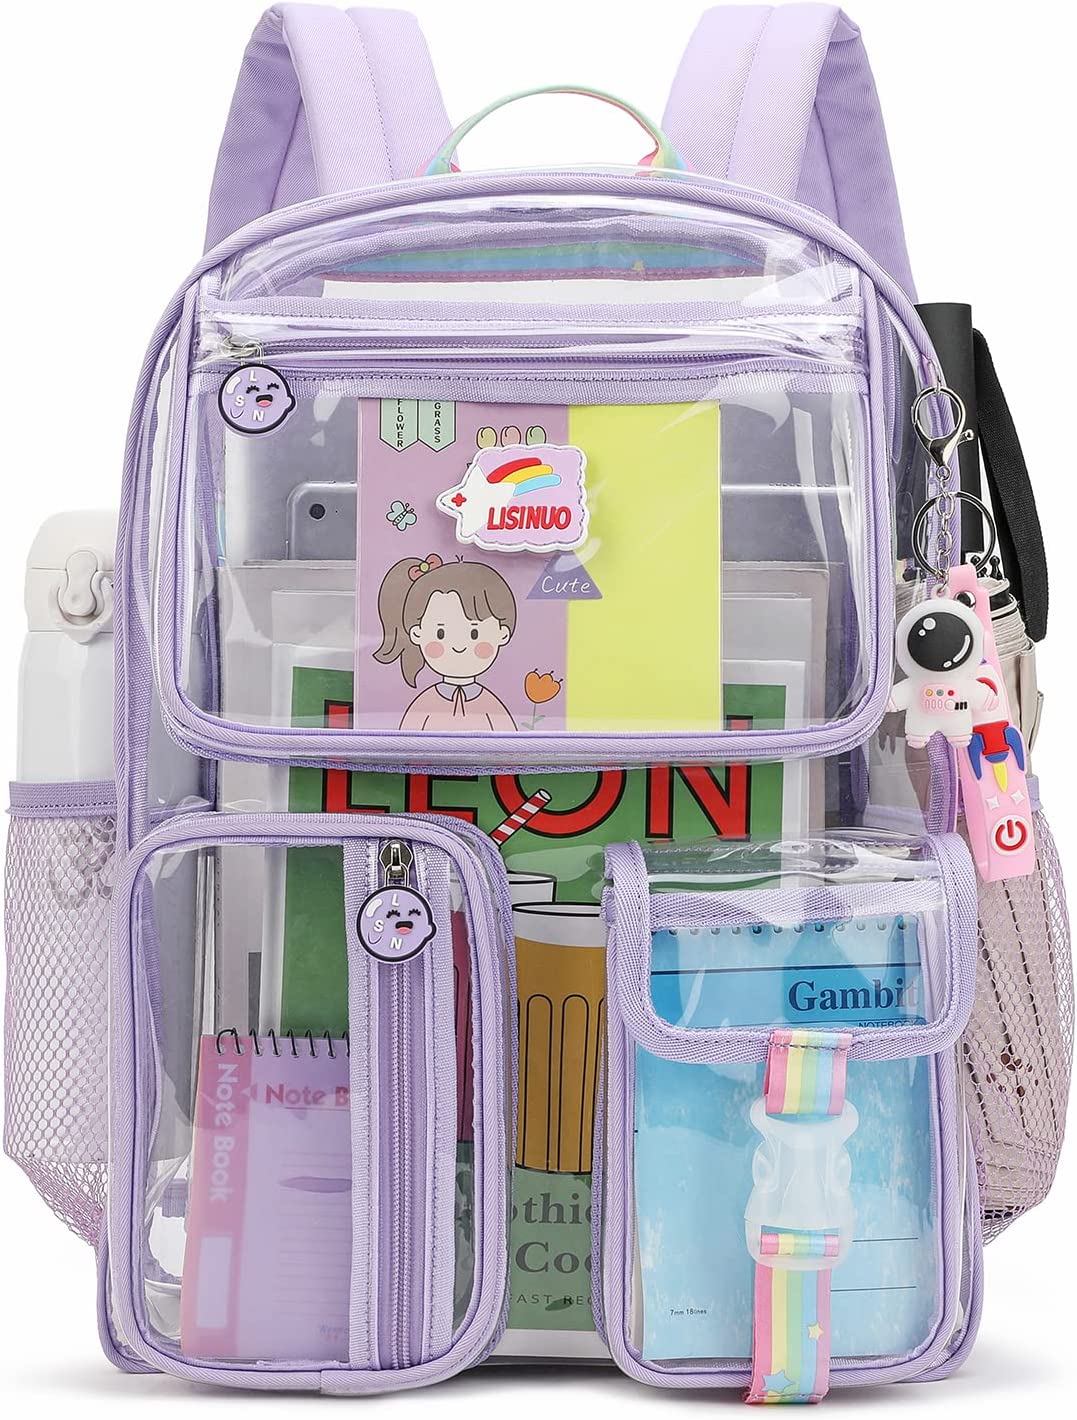 Clear Backpacks for School Students and Kids